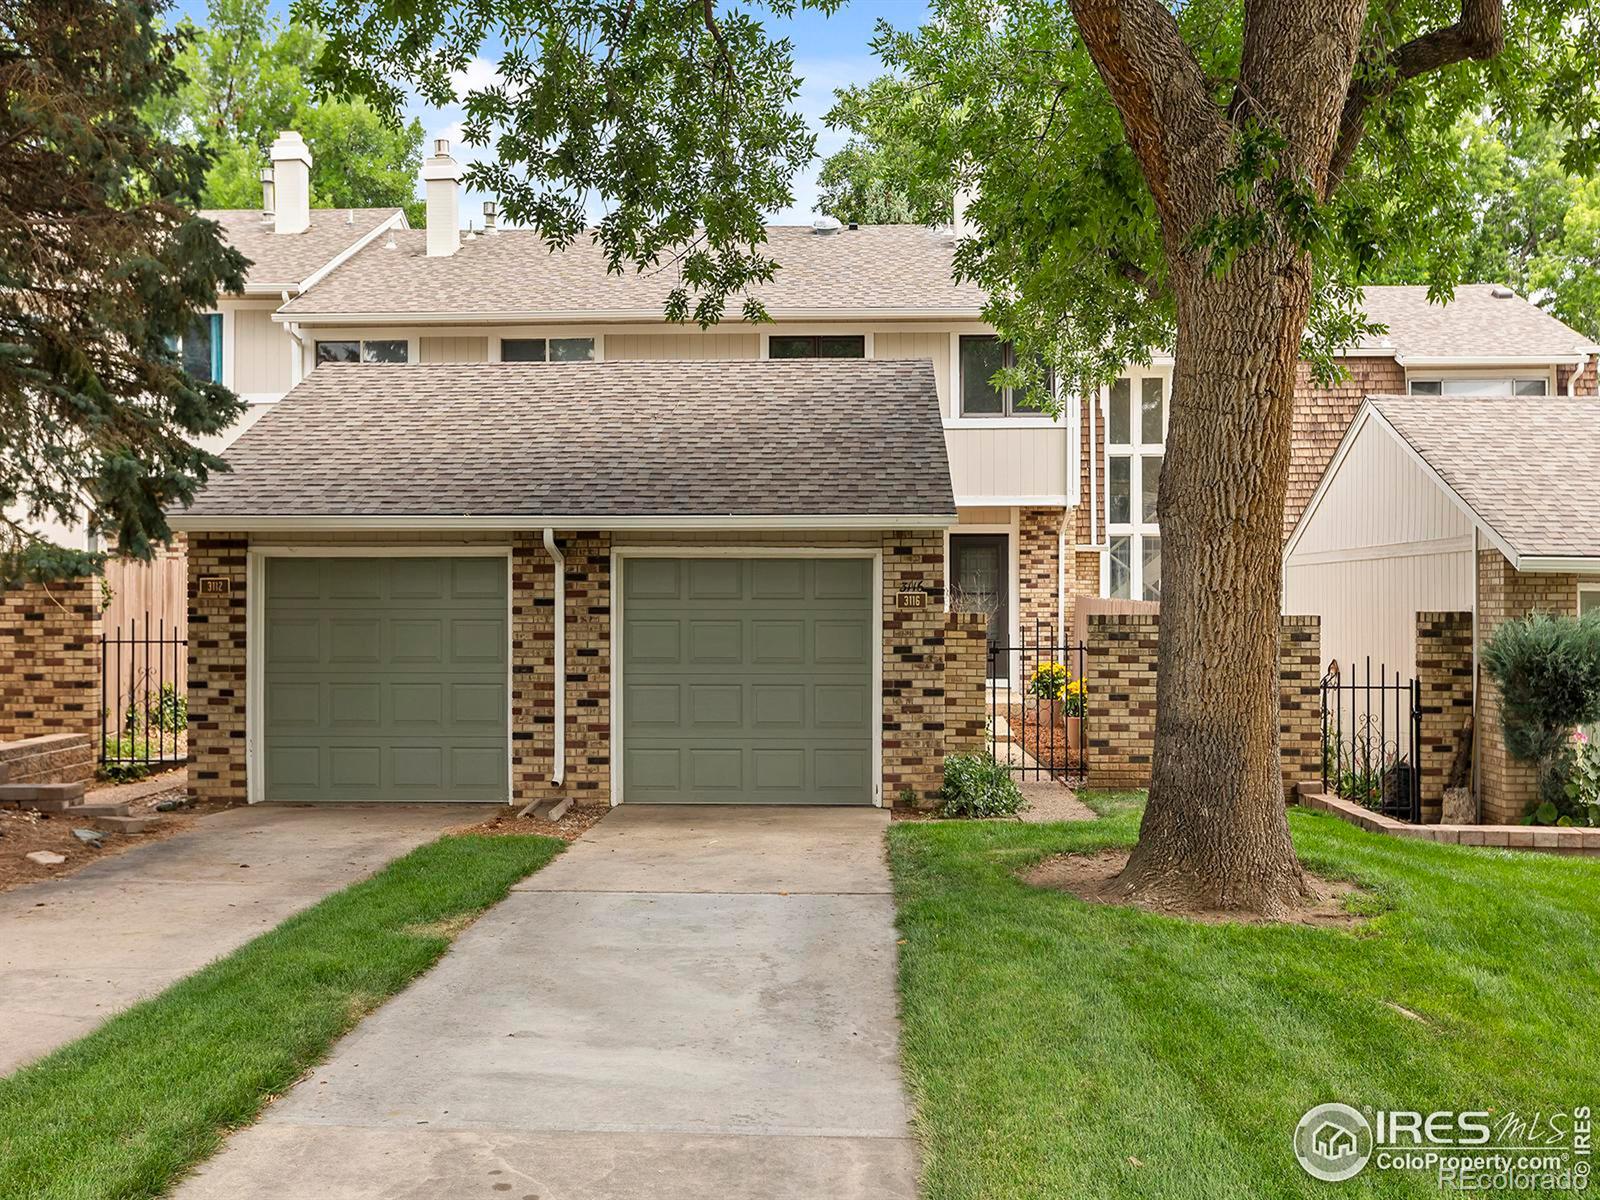 3116  Stanford Road, fort collins MLS: 4567891014631 Beds: 3 Baths: 2 Price: $400,000